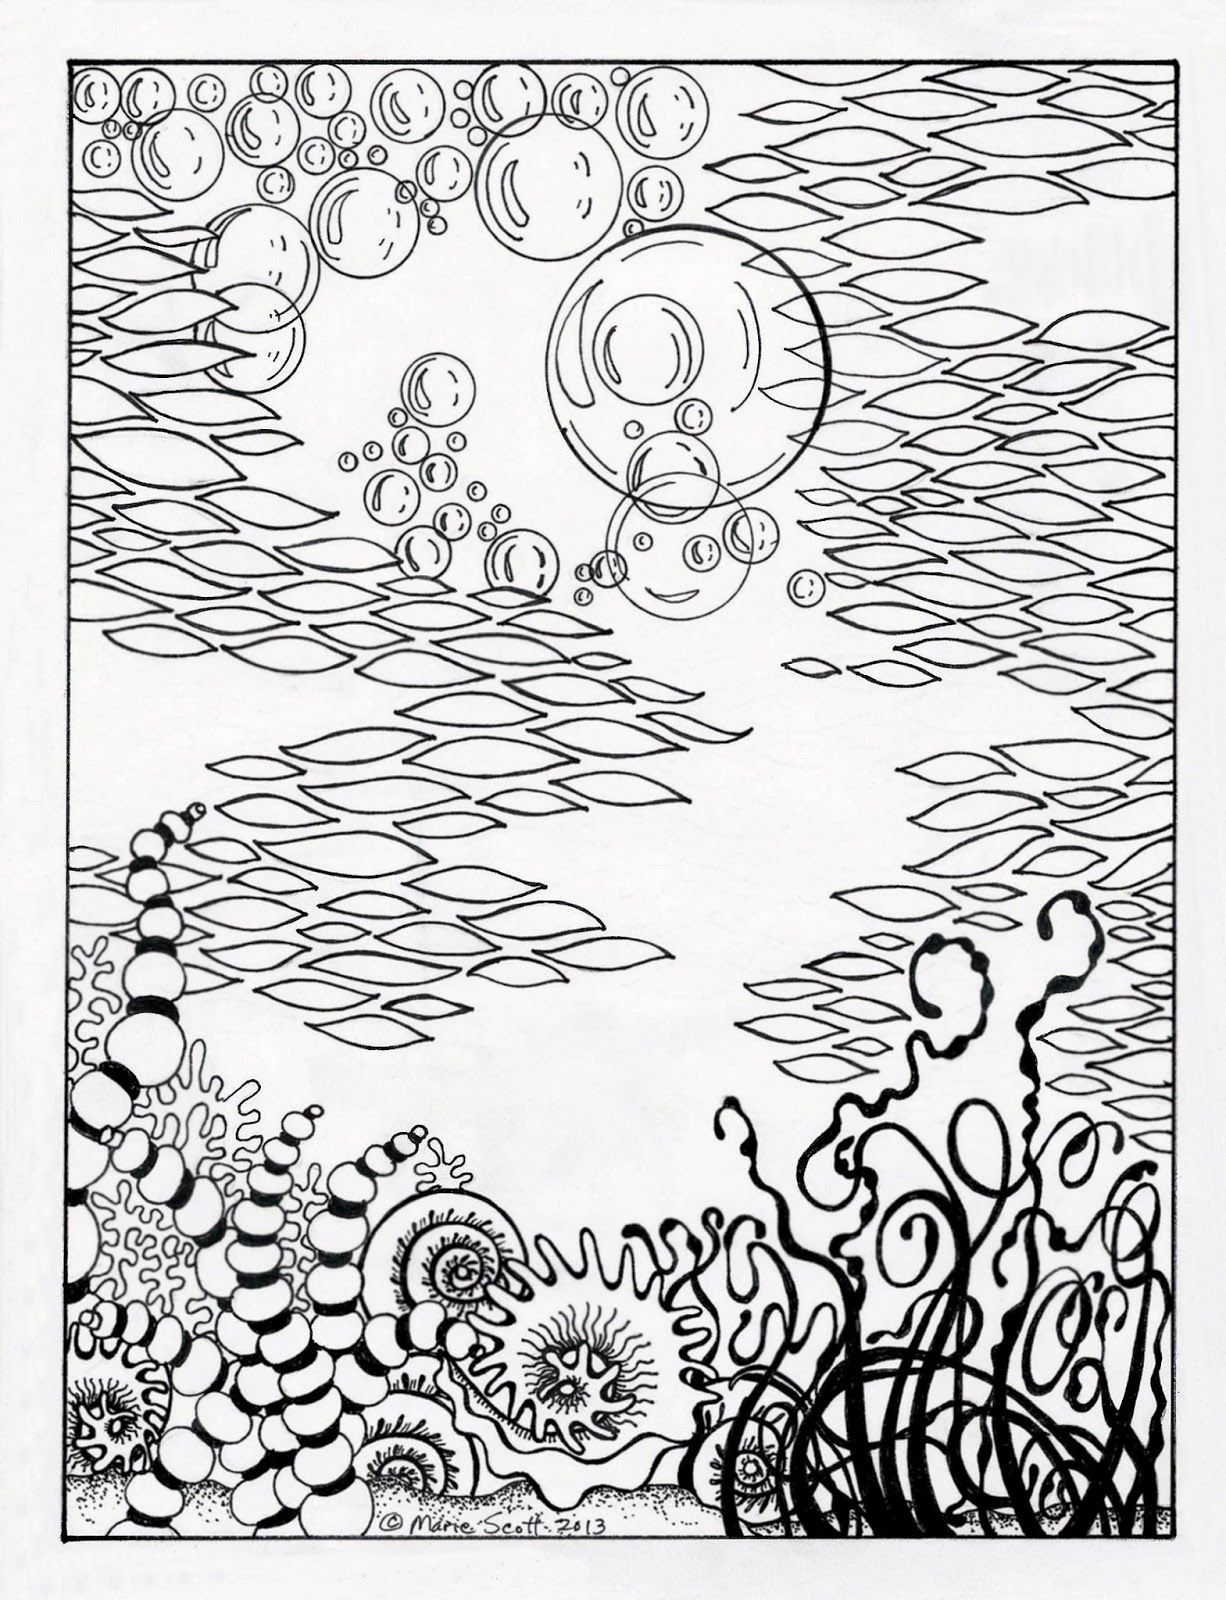 Underwater Coloring Pages